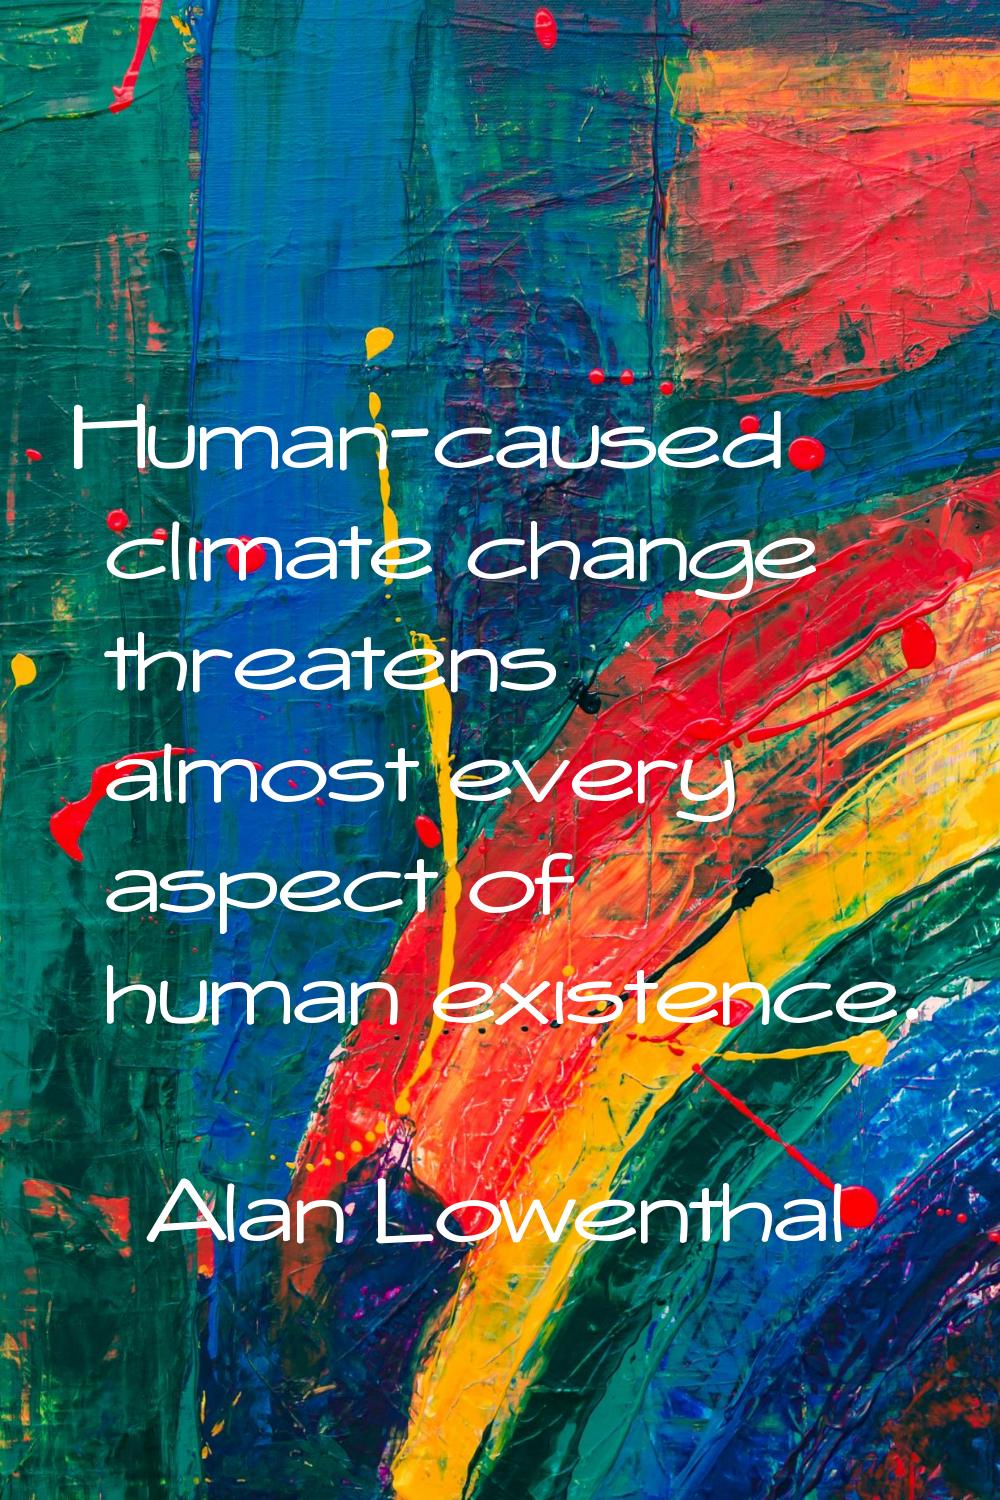 Human-caused climate change threatens almost every aspect of human existence.